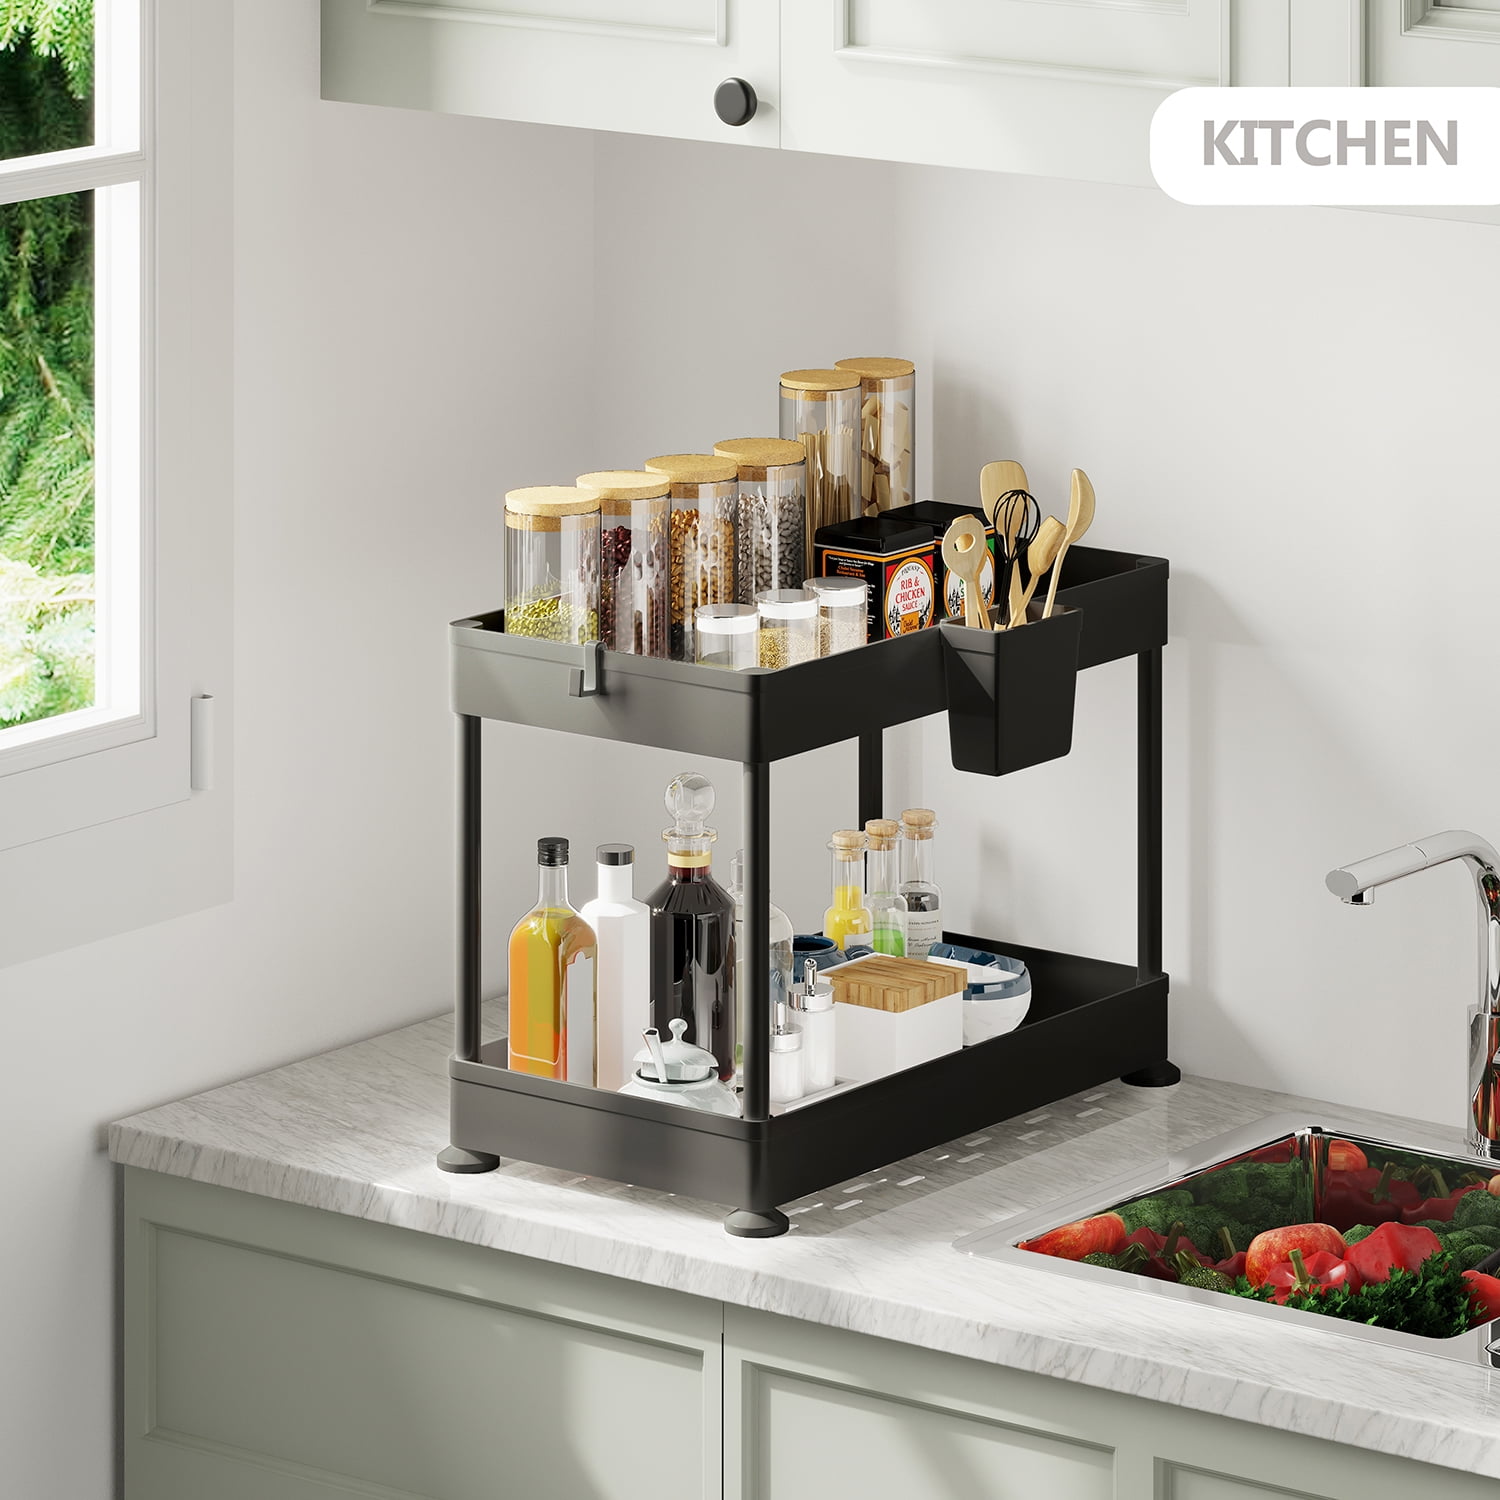 SpaceAid® Quick-Dry Kitchen and Bathroom Sink Caddy Organizer, the Soa